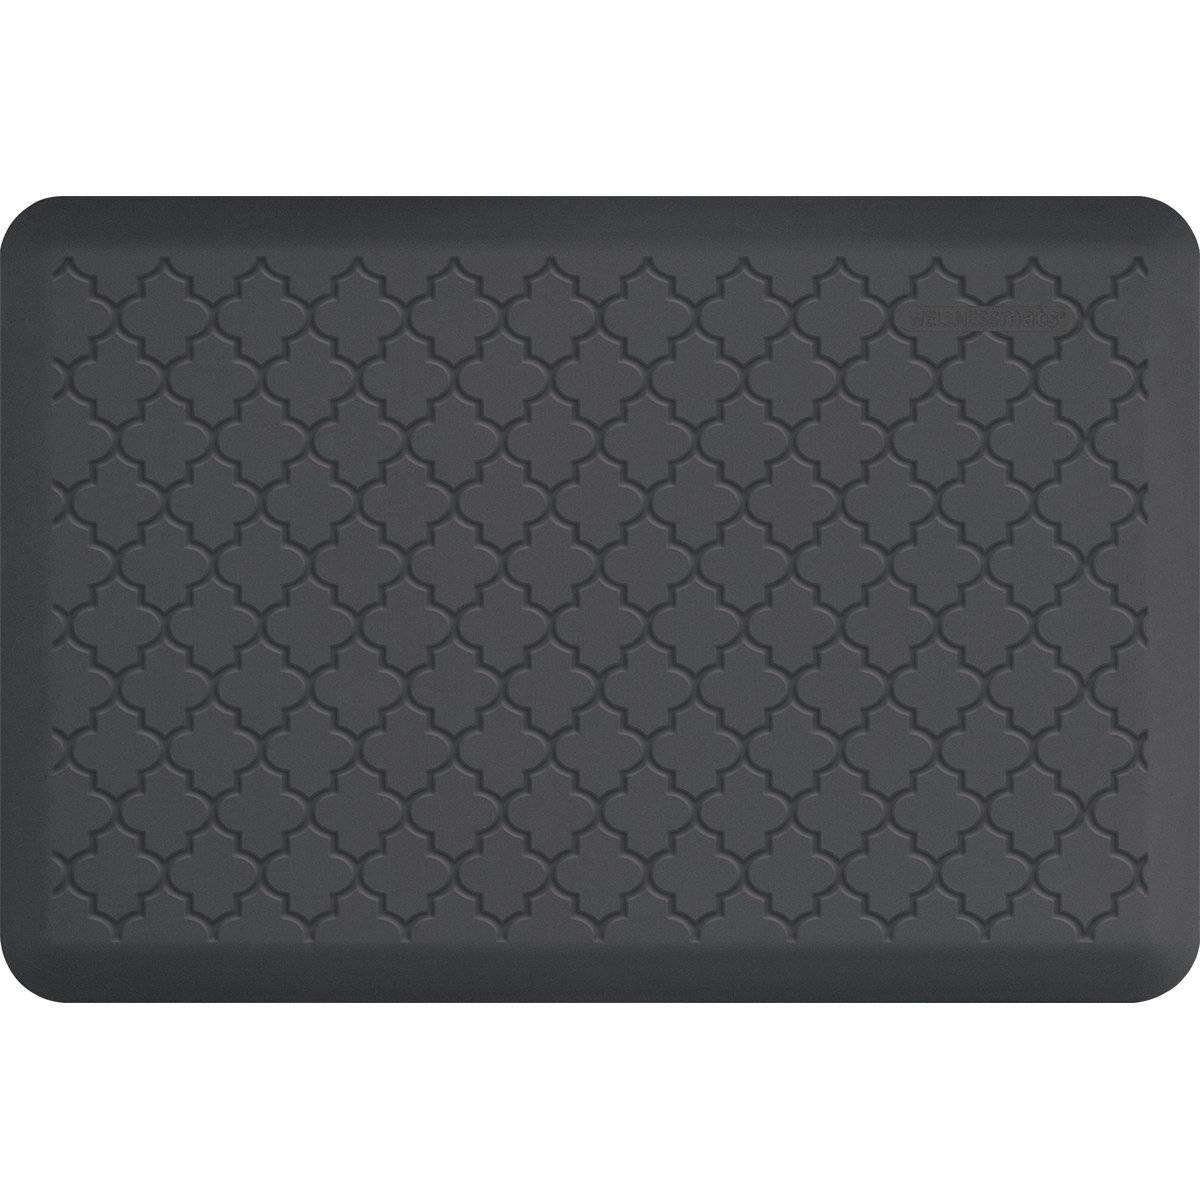 WellnessMats Trellis Motif 3' X 2' MT32WMRGRY Kitchen floor mats that resist punctures, heat, dirt and stains. A floor mat that provides cushion and nonslip surface. 